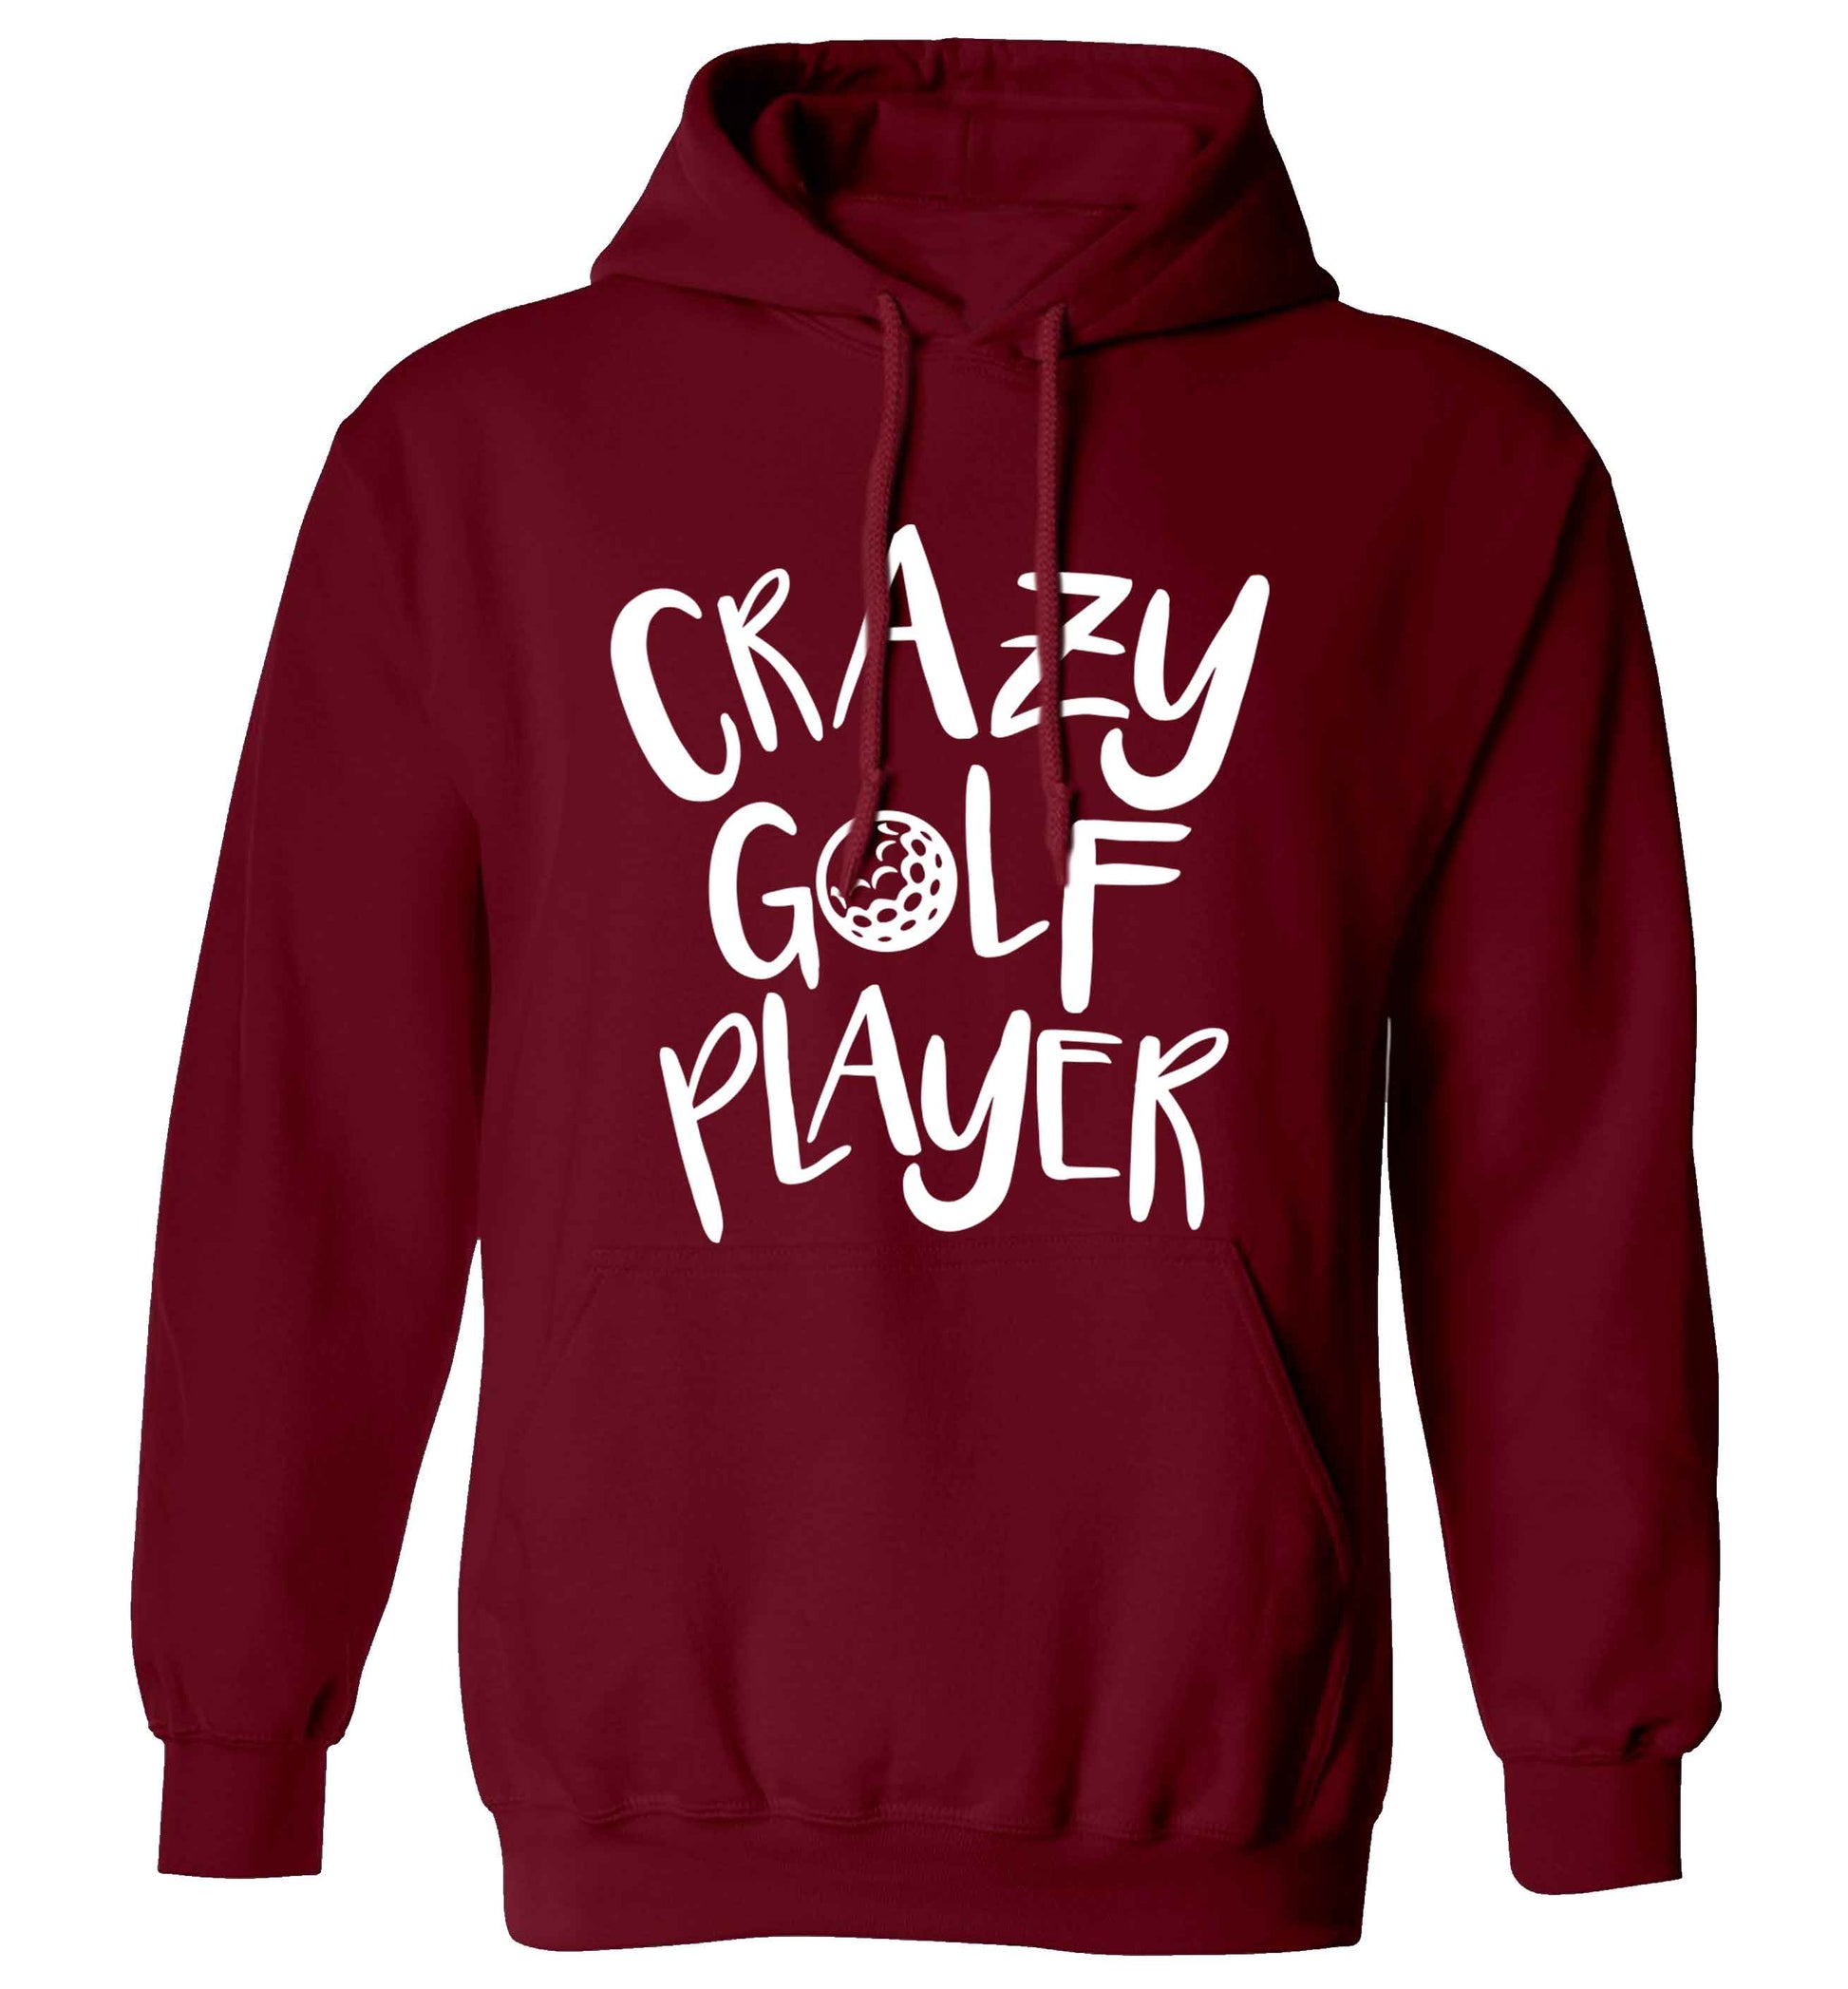 Crazy golf player adults unisex maroon hoodie 2XL